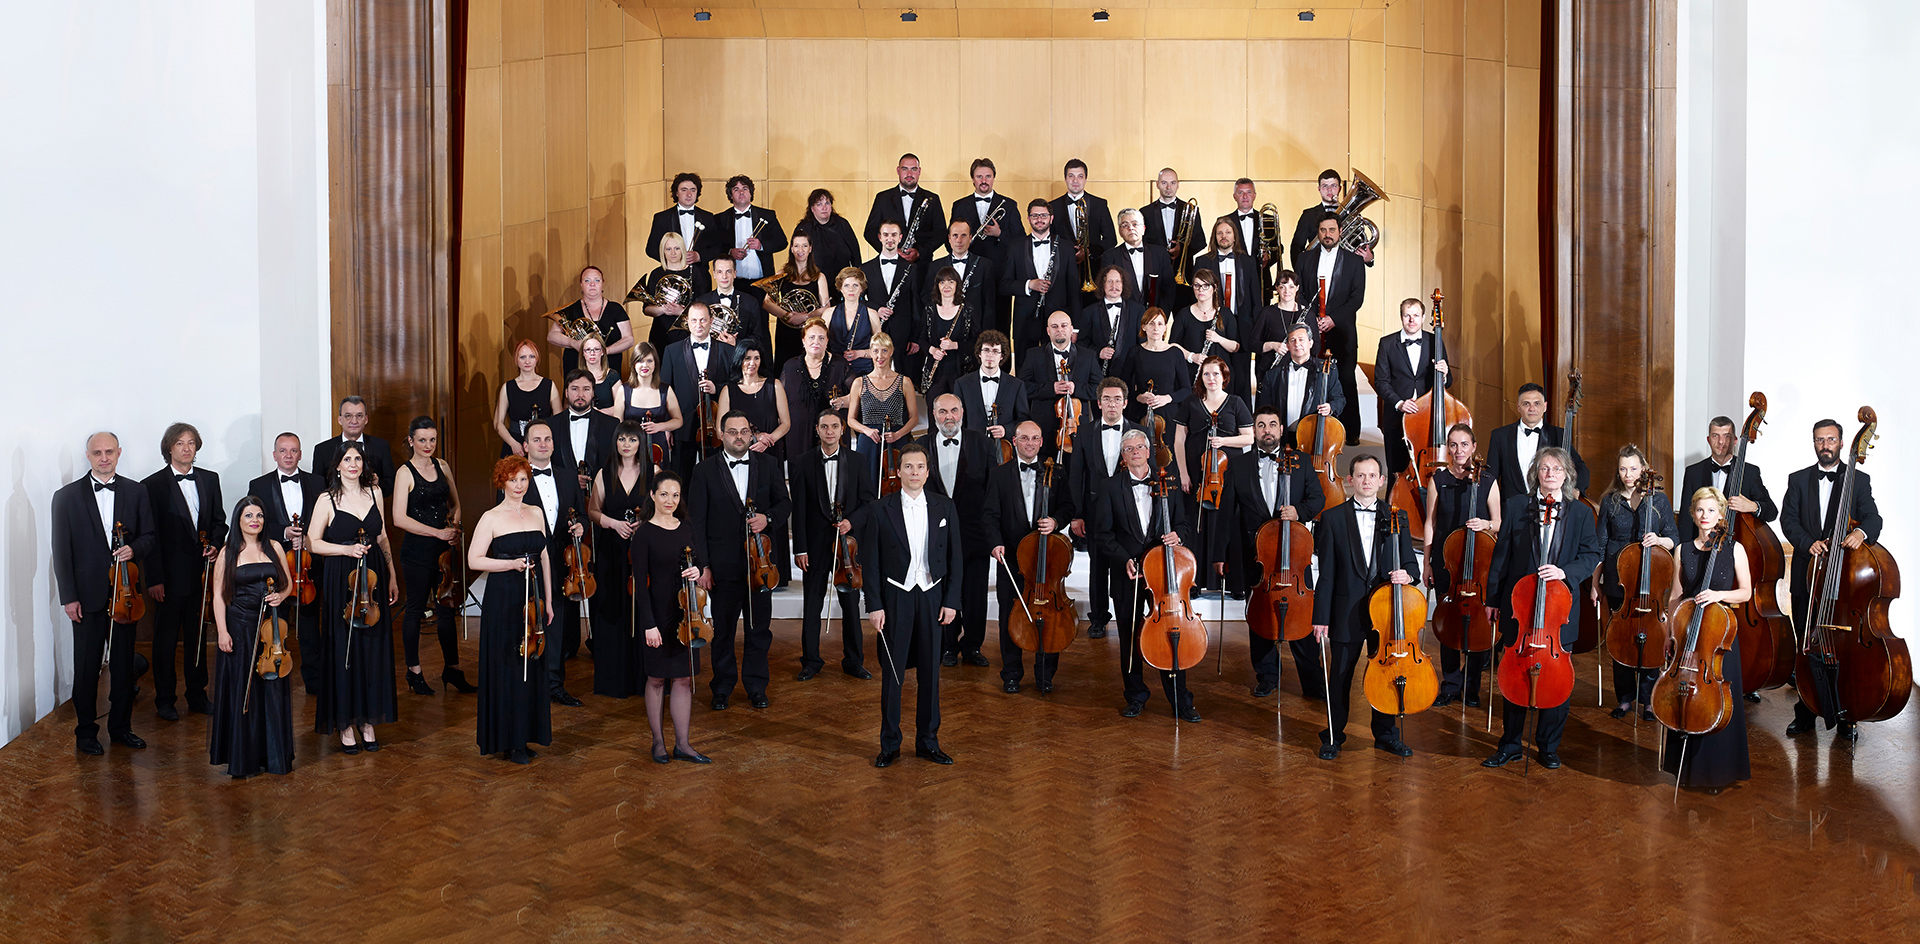 TWO PREMIERES AT THE CONCERT OF THE RTS SYMPHONY ORCHESTRA